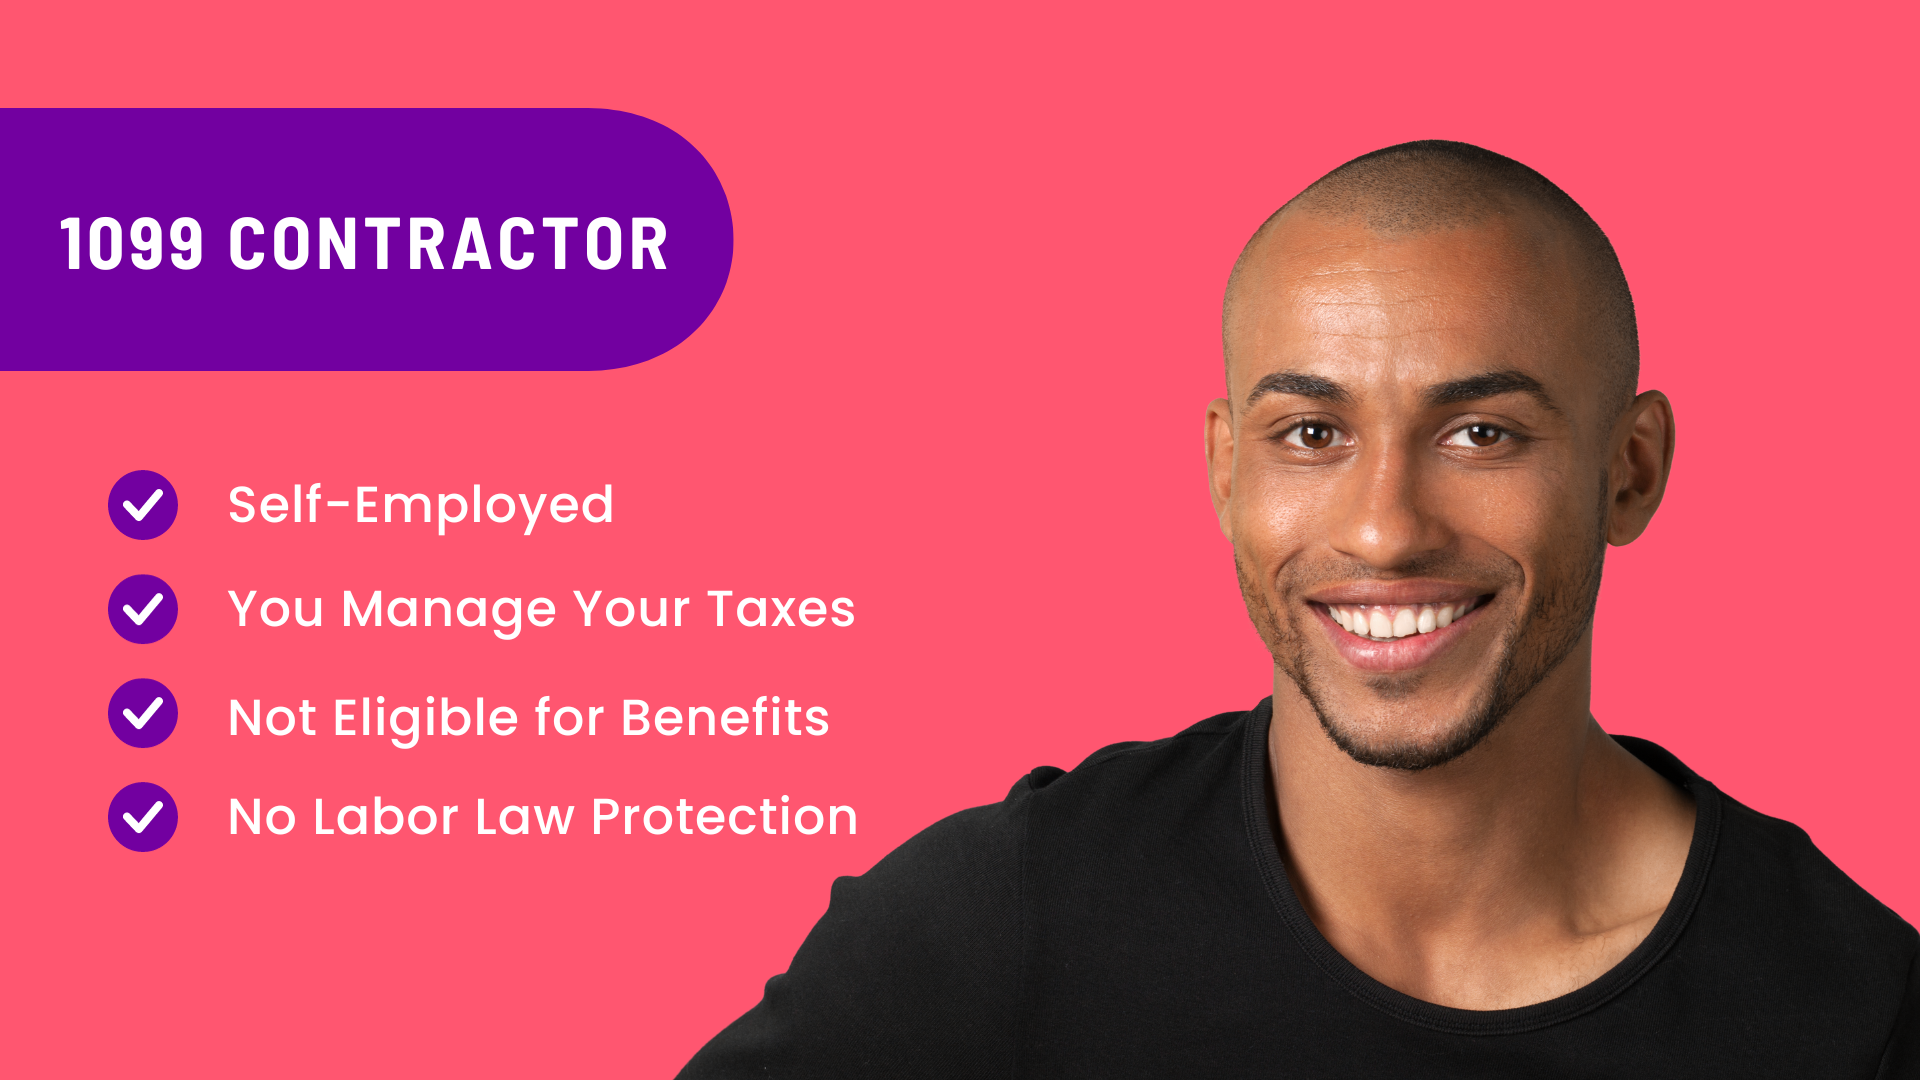 The image lists aspects of being a 1099 contractor: self-employed, you manage your taxes, not eligible for company benefits, and no labor law protection.